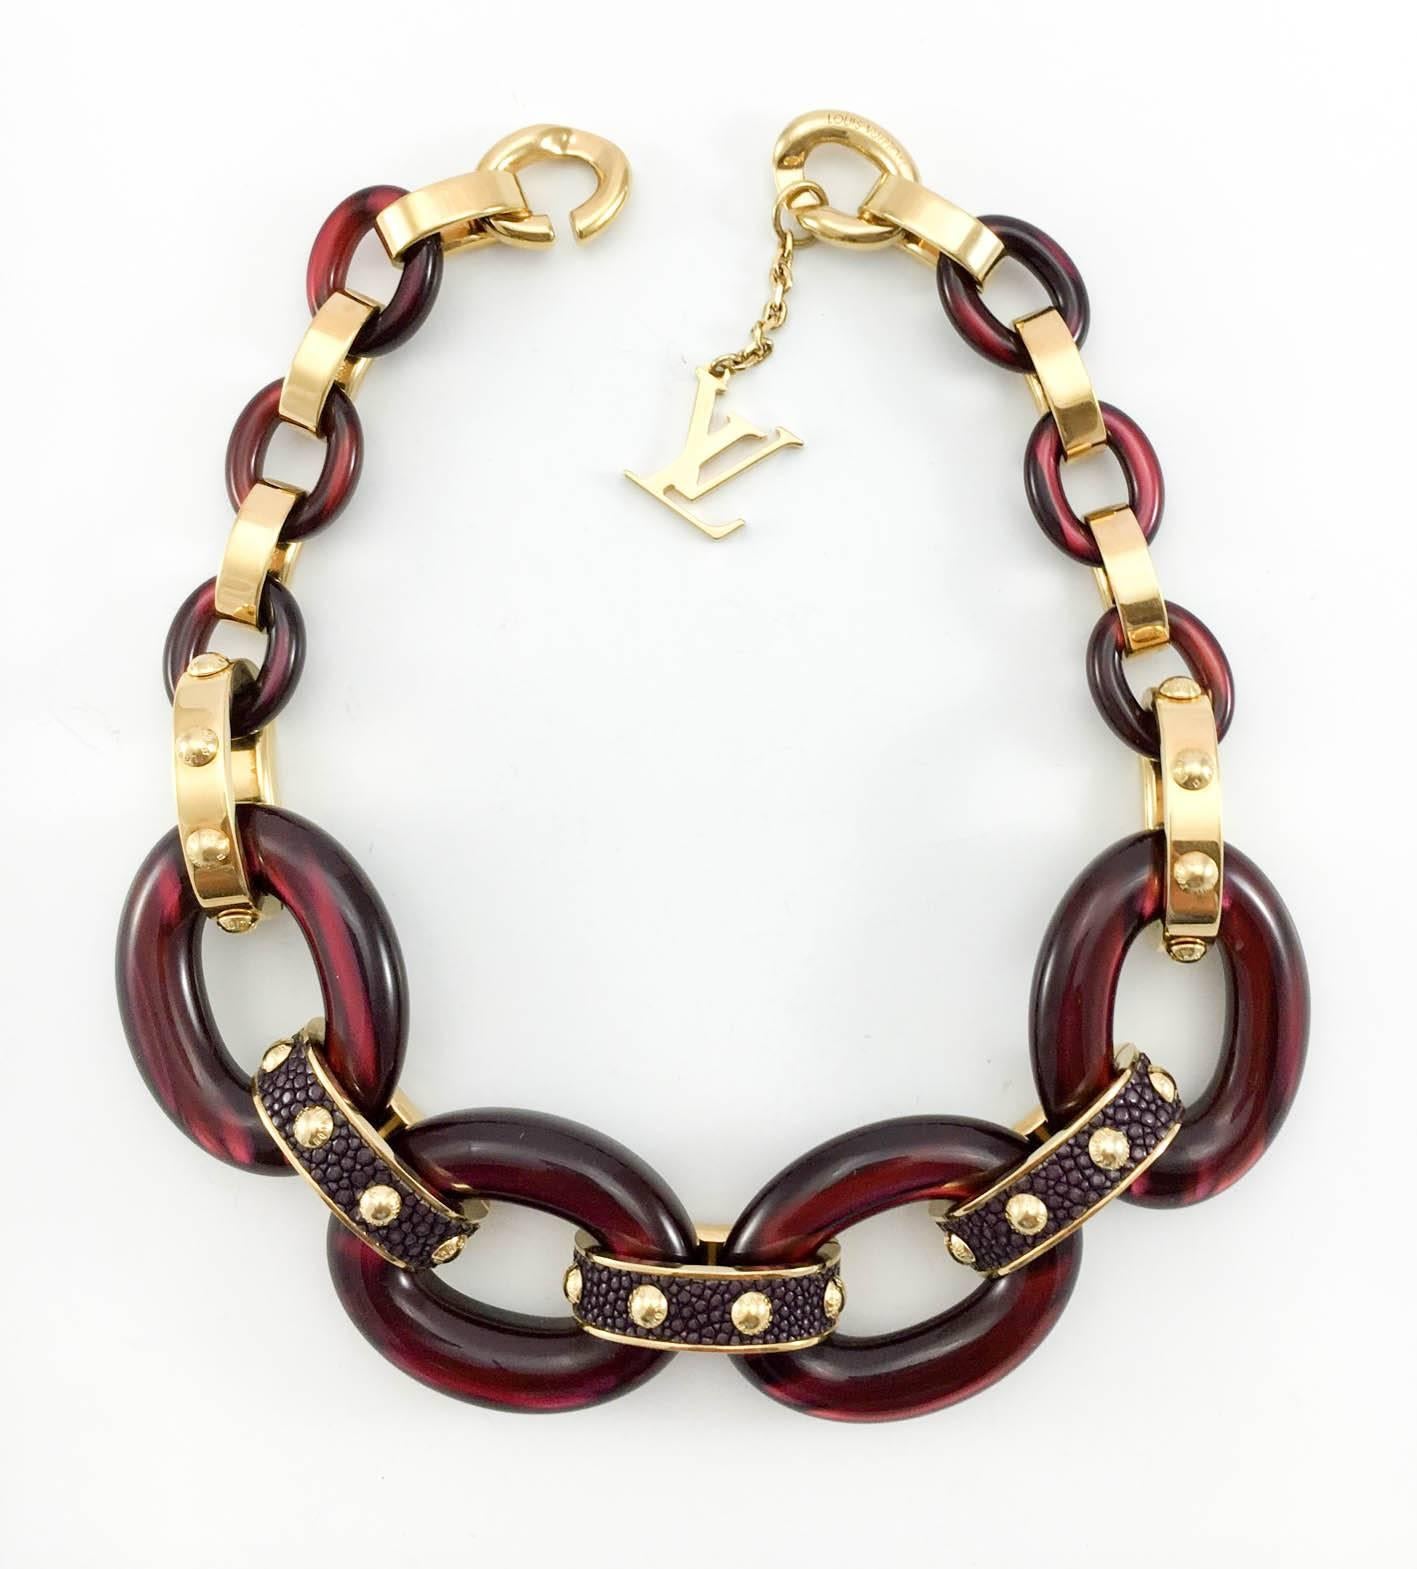 Gorgeous Louis Vuitton Necklace. This stunning piece is from the ‘Gimme a Clue’ line, which is characterised by luxurious materials, graphic shapes and studs that draw inspiration from trunk nails. The studs say Louis Vuitton, it is signed on the